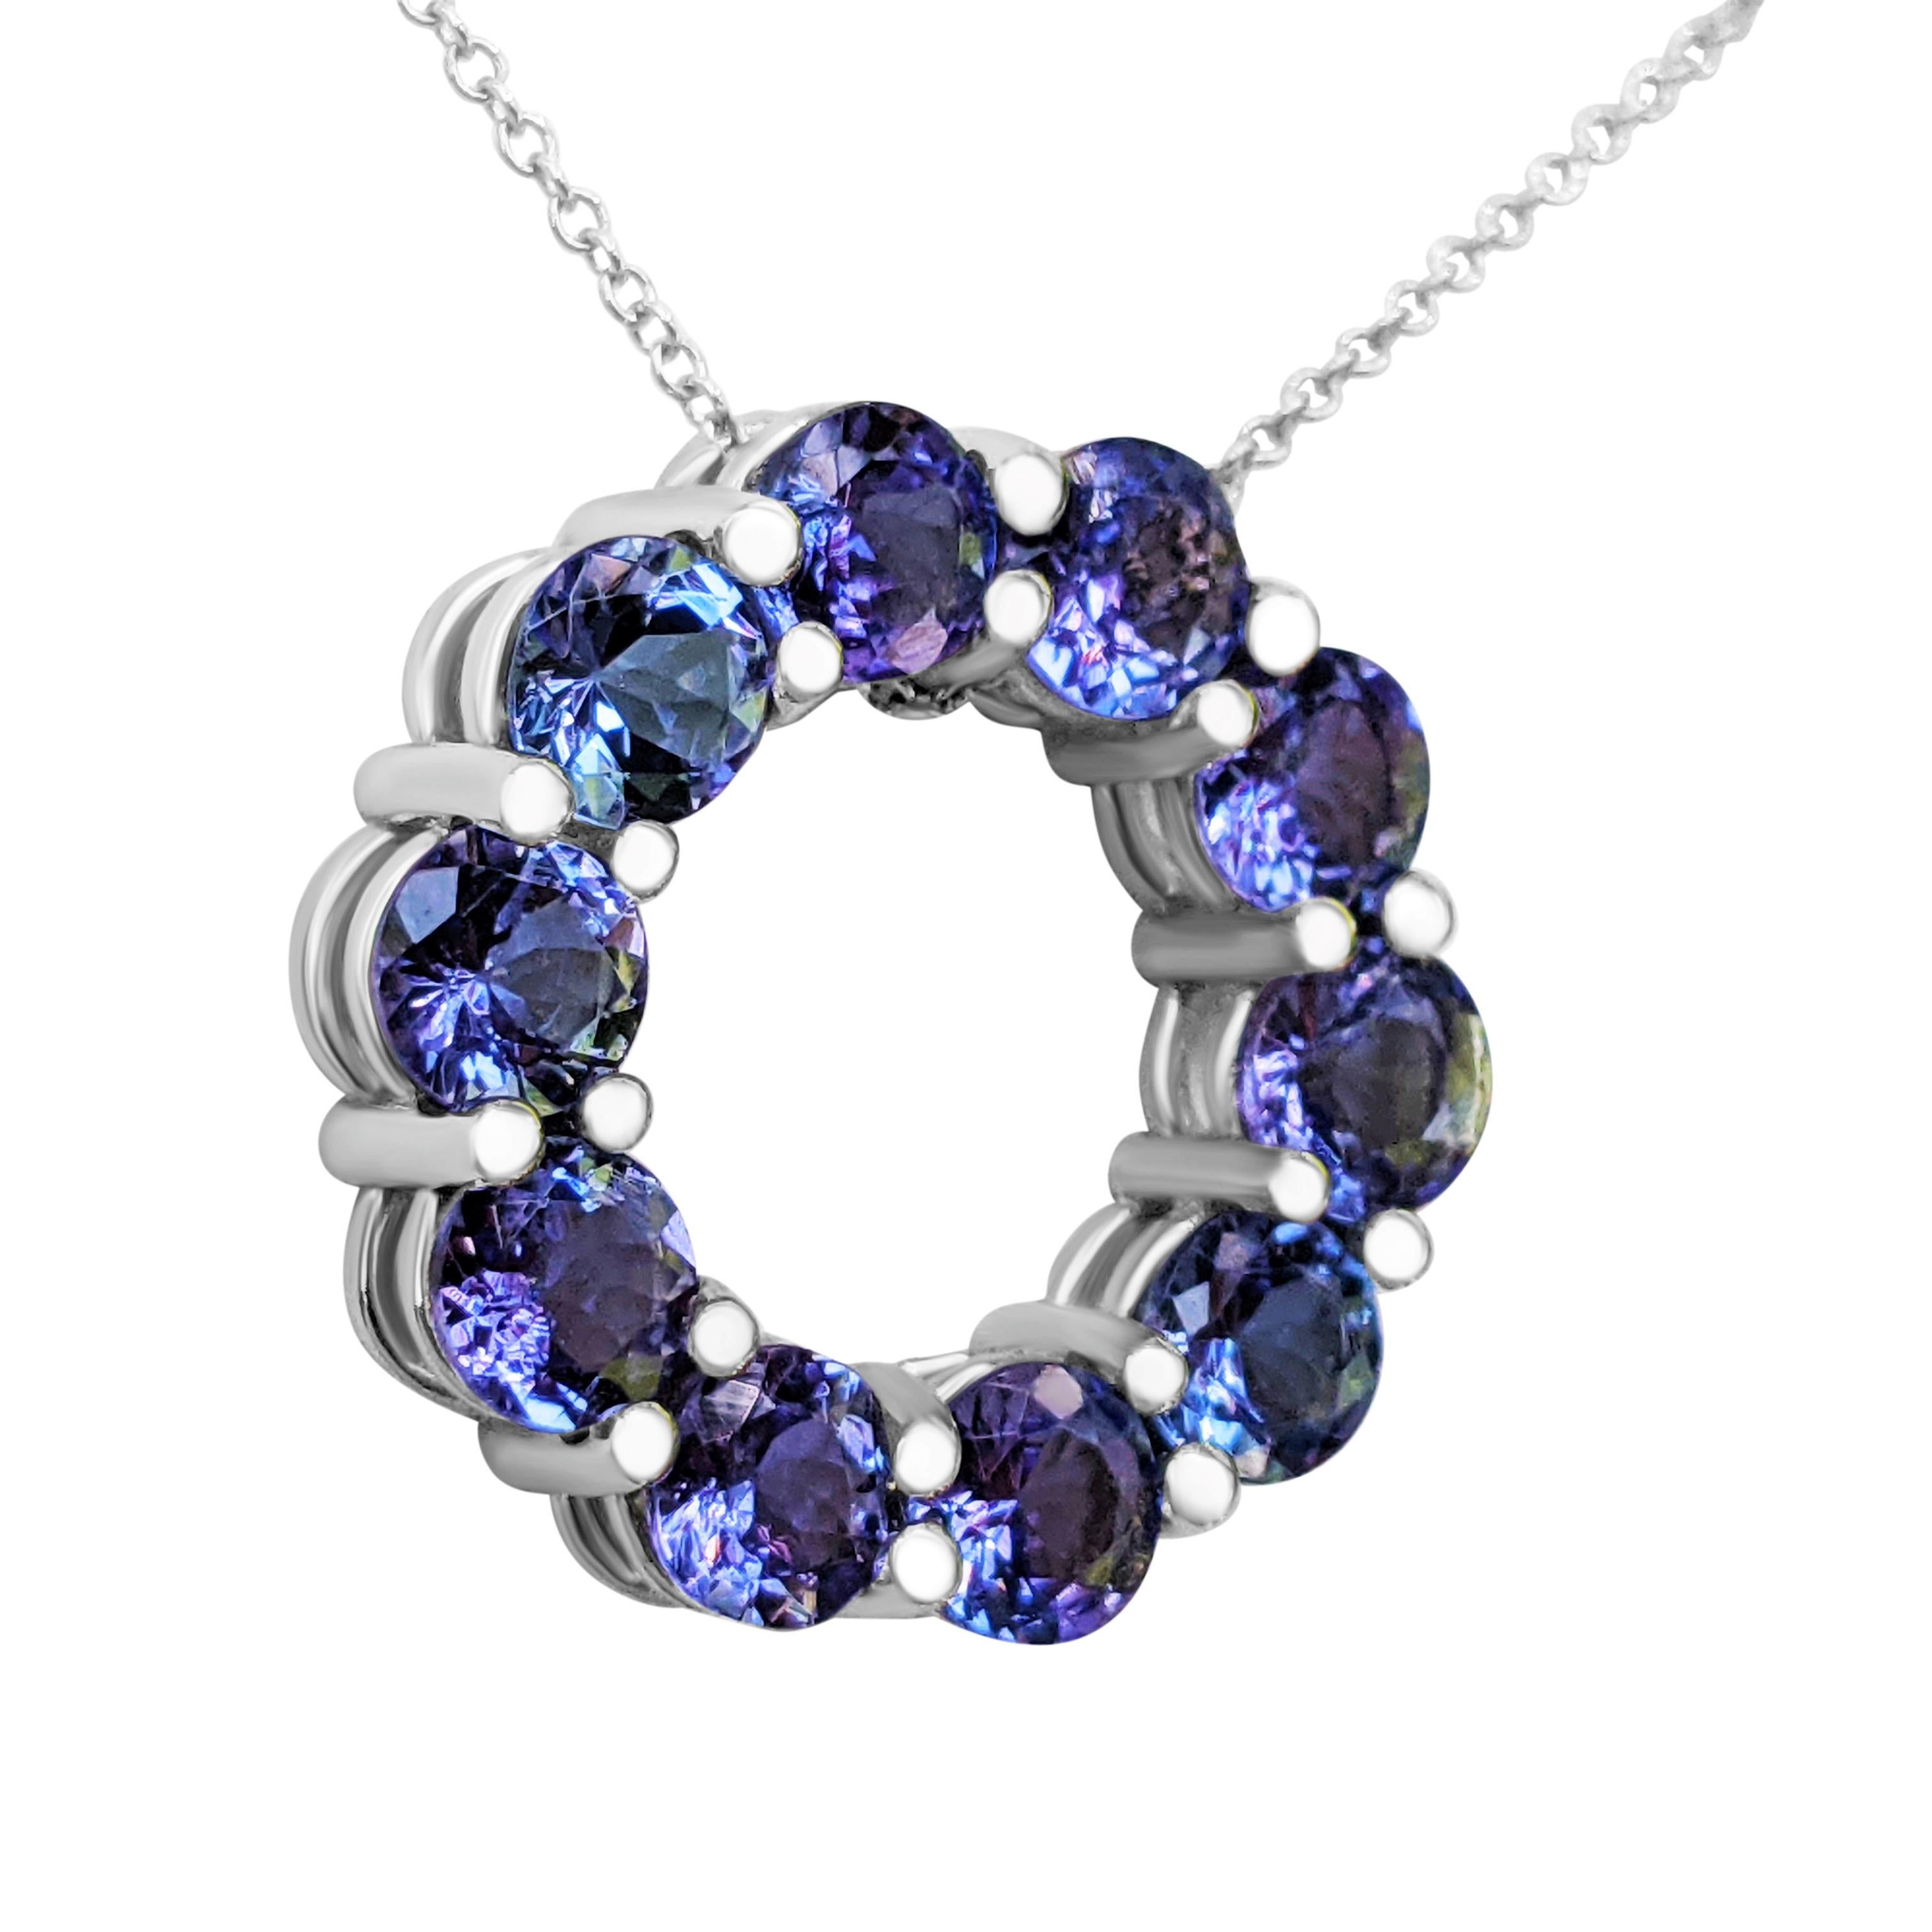 Women's 4.52 Carat Tanzanite, 14 Kt. White Gold, Necklace with Pendant